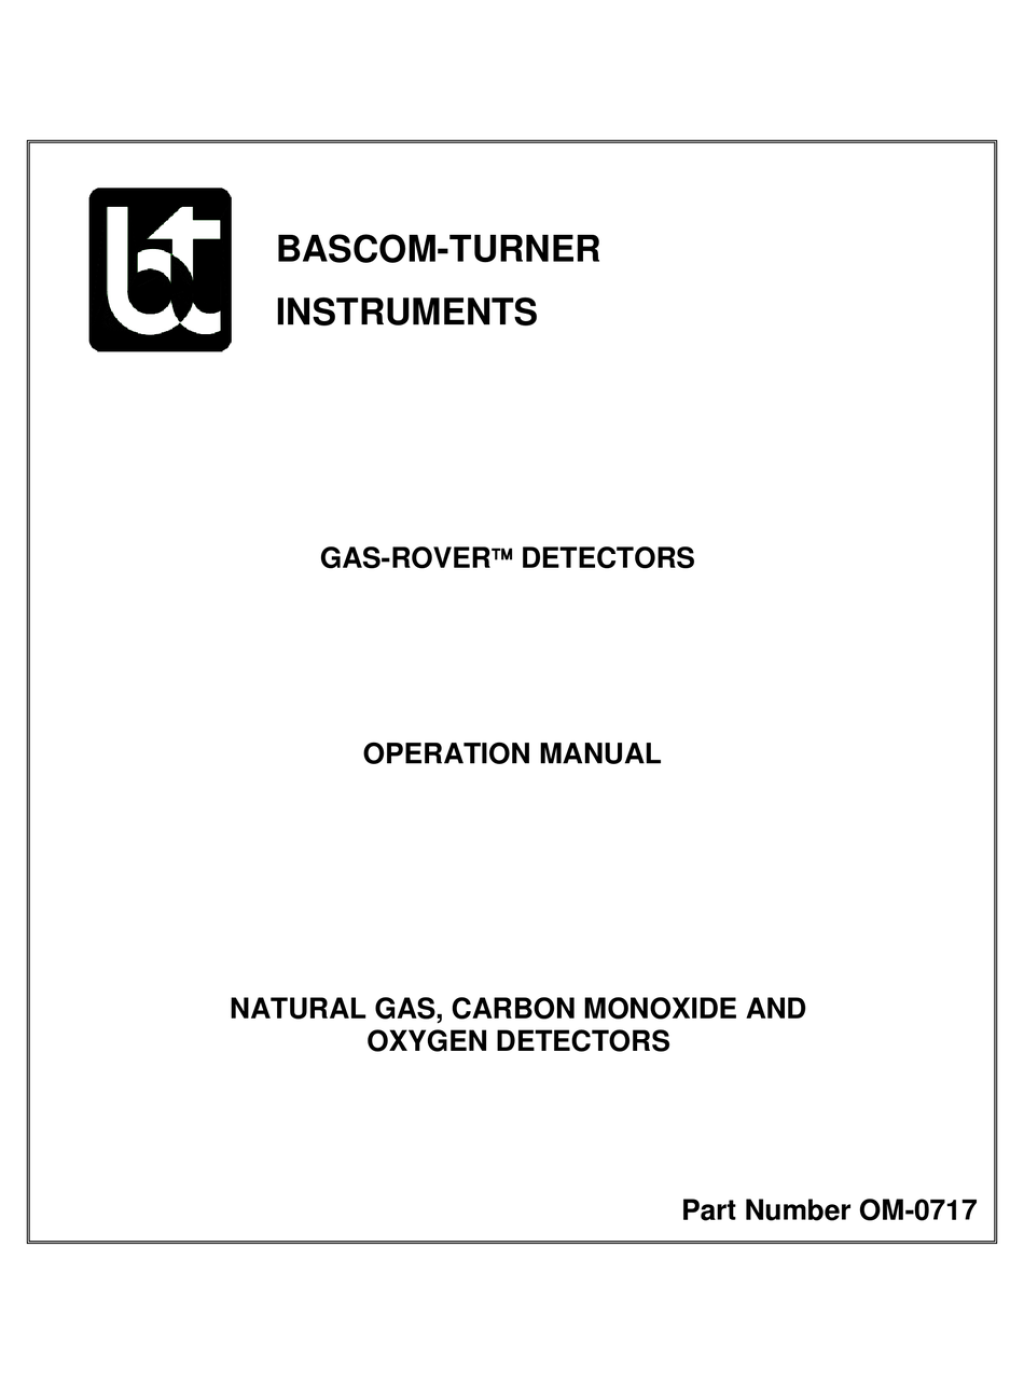 Picture of: BASCOM_TURNER GAS-ROVER VGI- OPERATION MANUAL Pdf Download